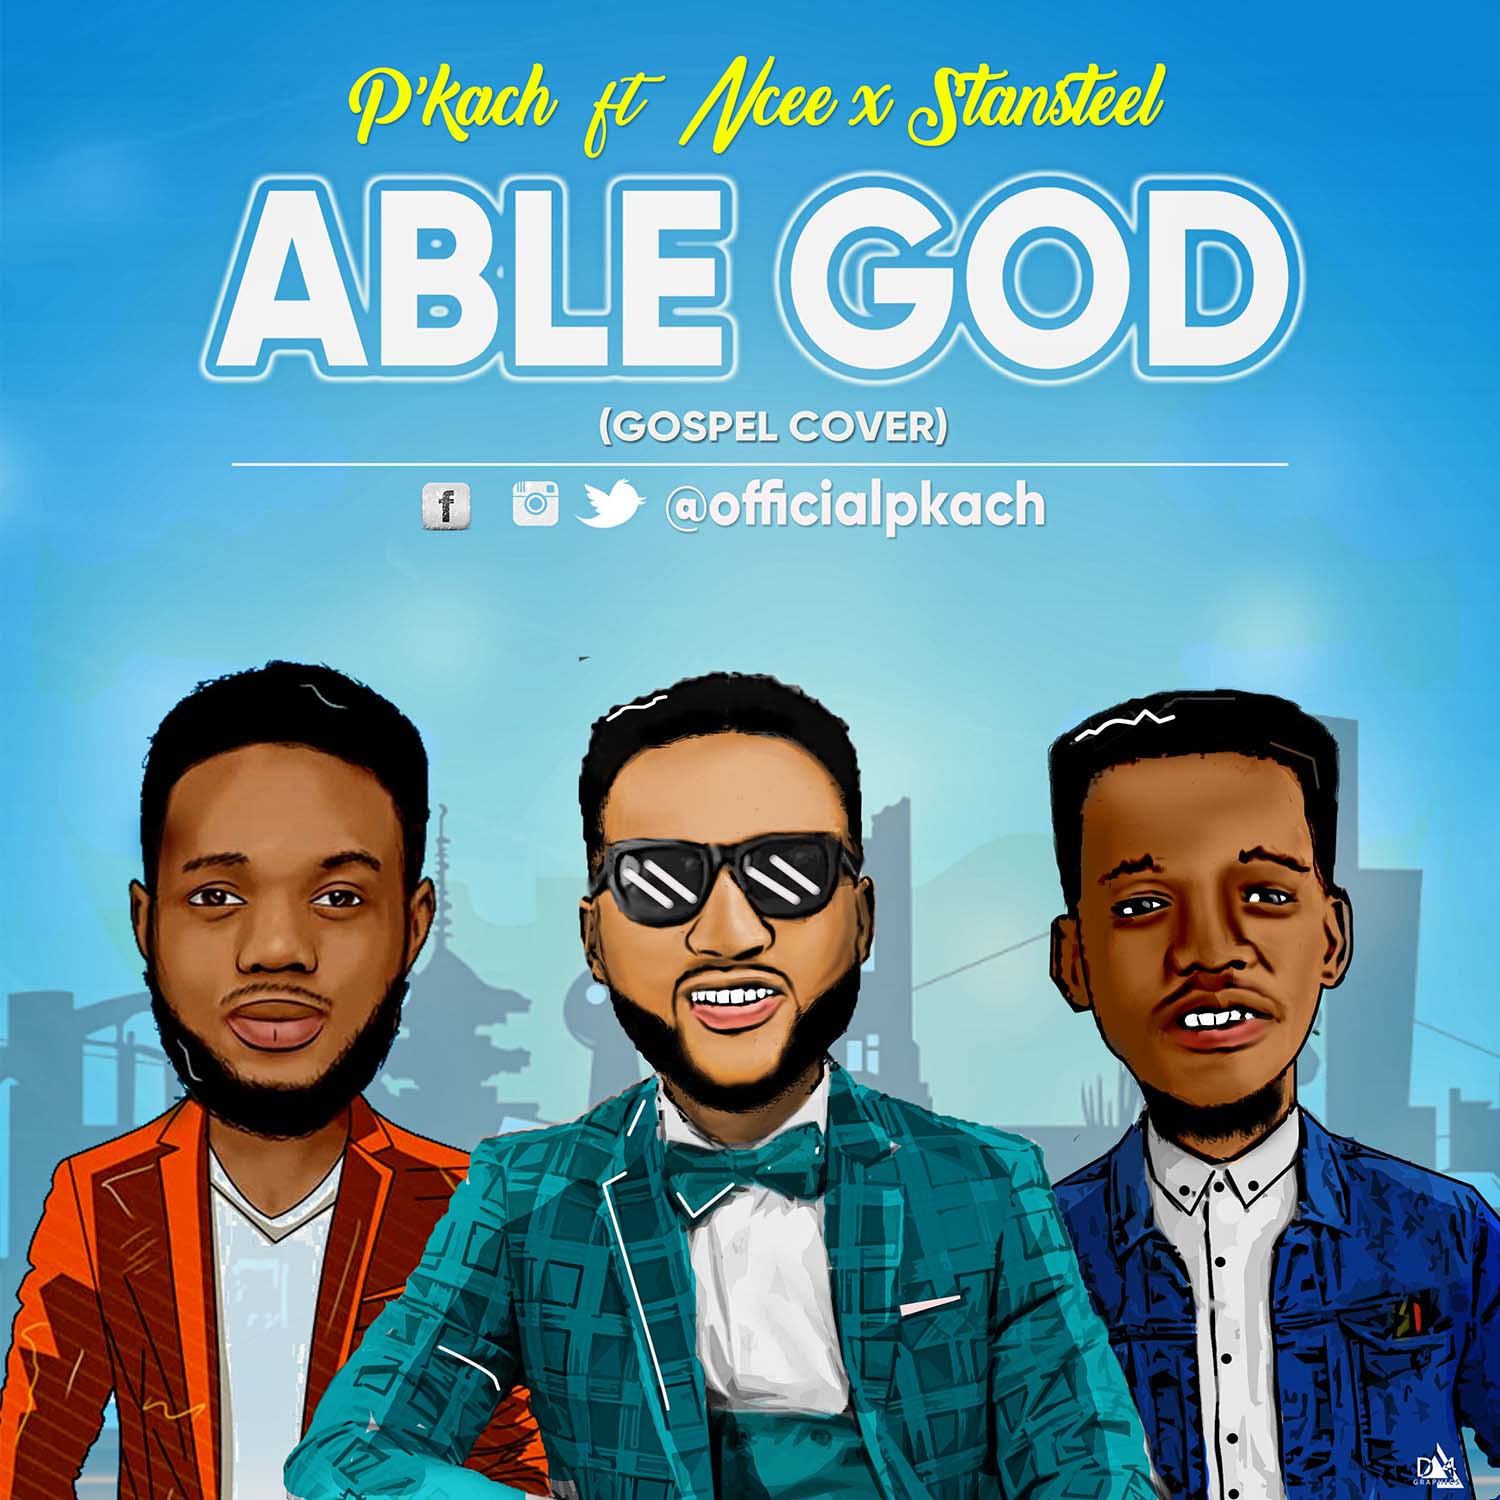 Able God - P'kach Ft. Ncee & Stantlsteel [Art]